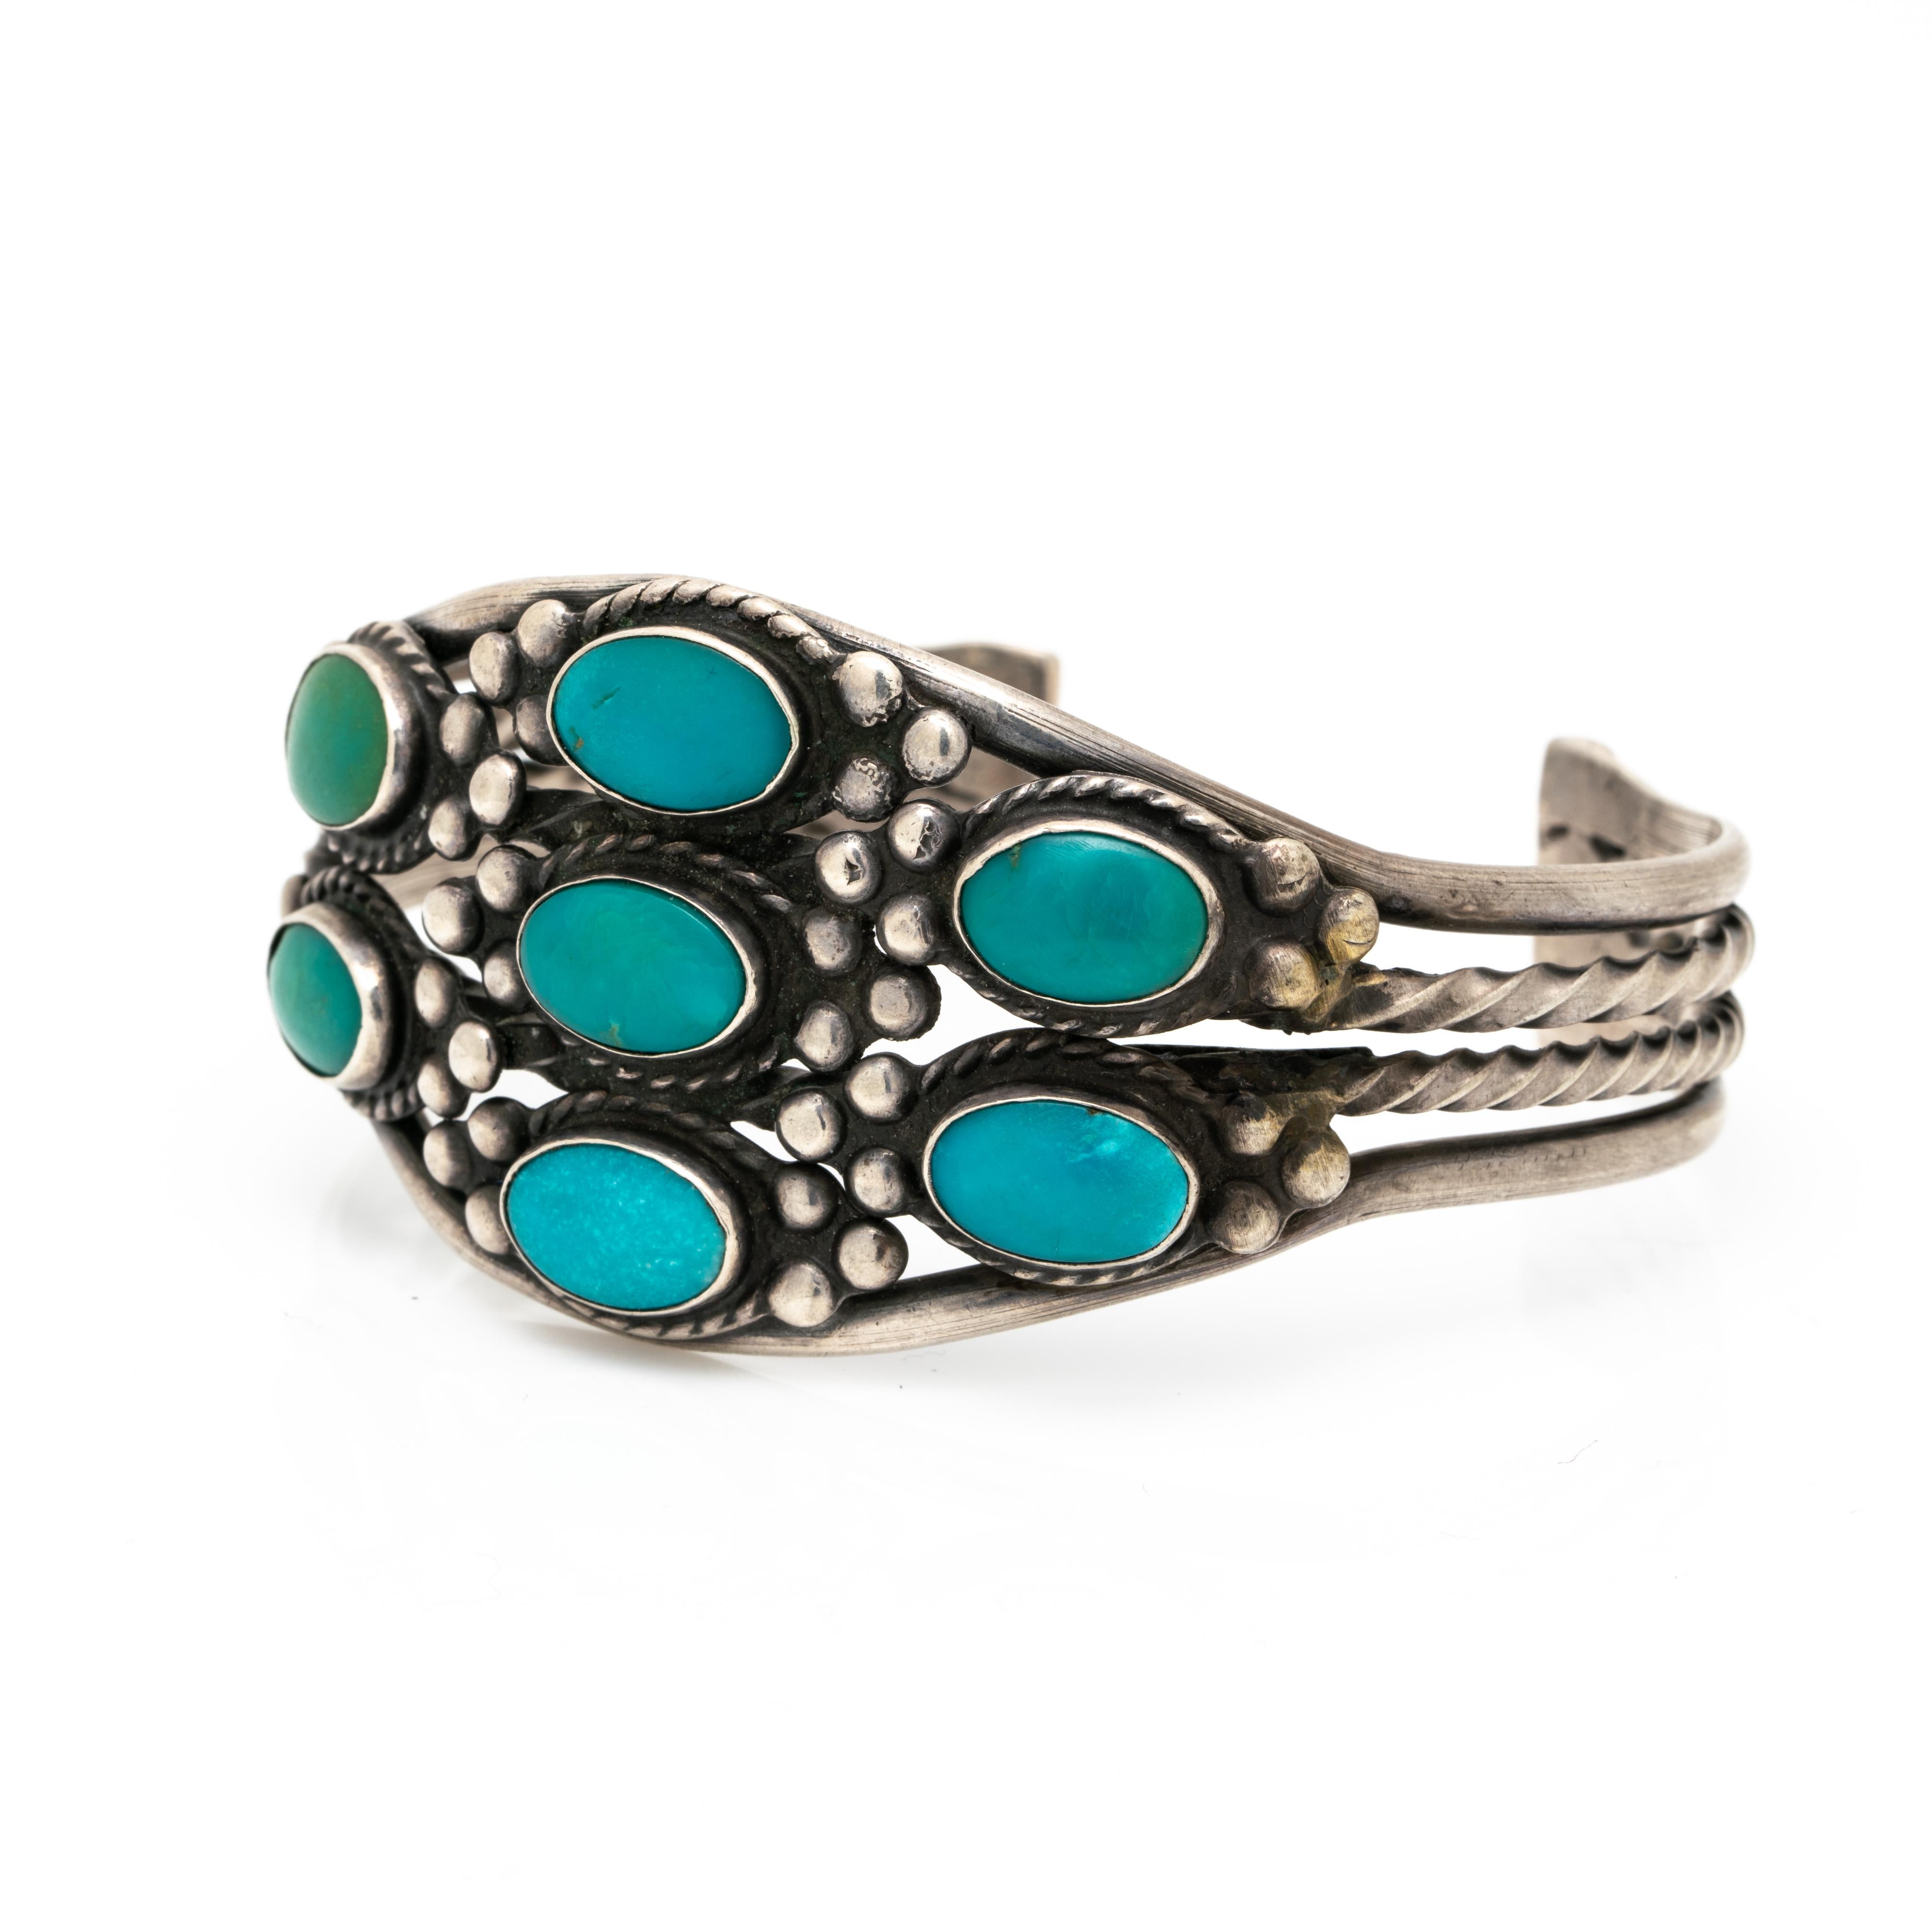 Native American Navajo Turquoise Bracelet c. 1950s
Hand engraved and hand forged. A wonderful Navajo cuff!

The patina of the silver is oxidized, we do not clean vintage and antique silver pieces as some clients prefer them in their natural oxidized